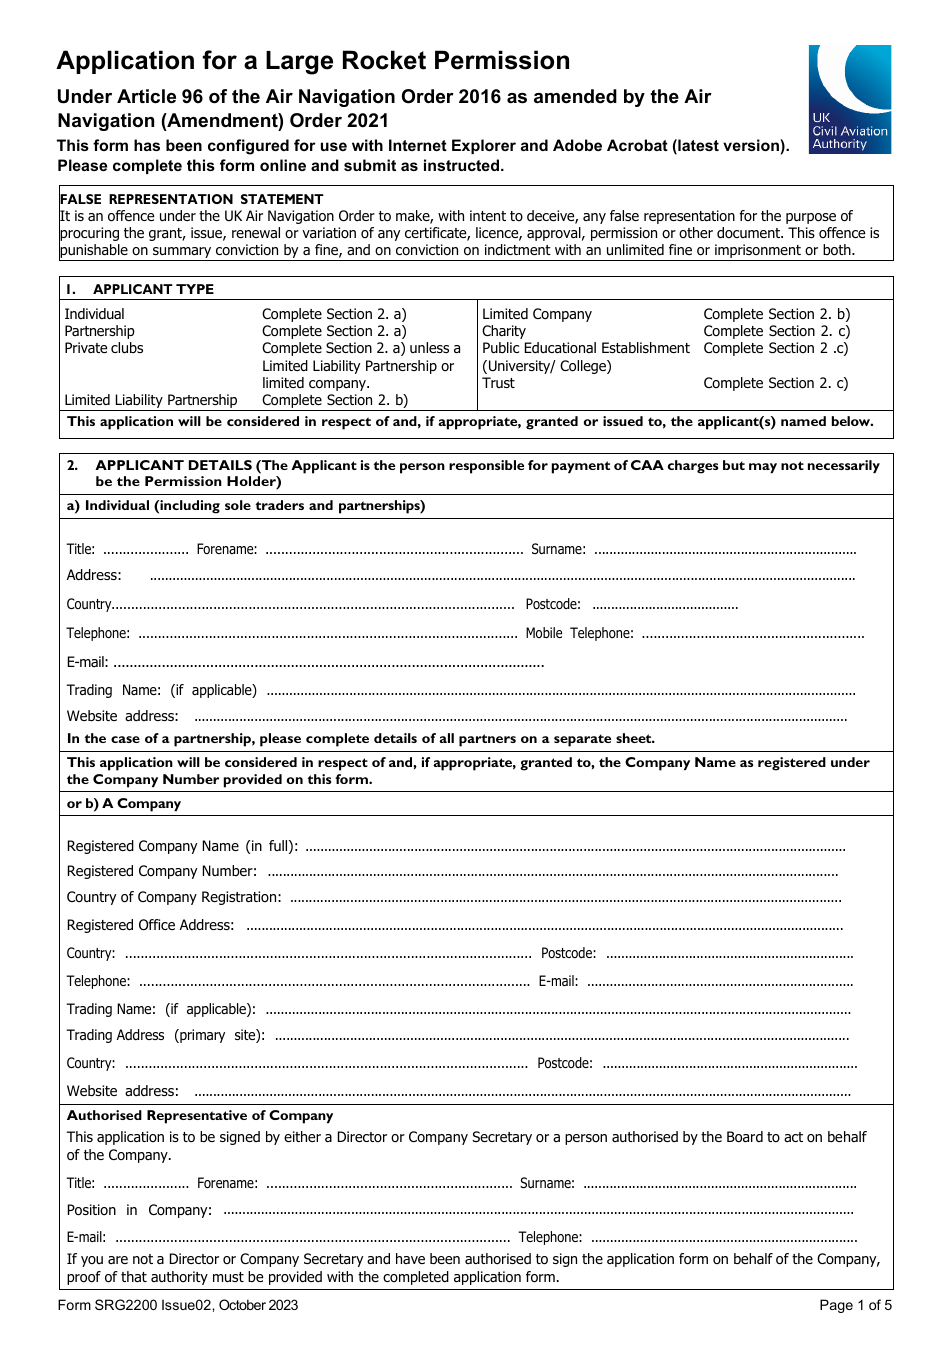 Form SRG2200 Application for a Large Rocket Permission Under Article 96 of the Air Navigation Order 2016 as Amended by the Air Navigation (Amendment) Order 2021 - United Kingdom, Page 1